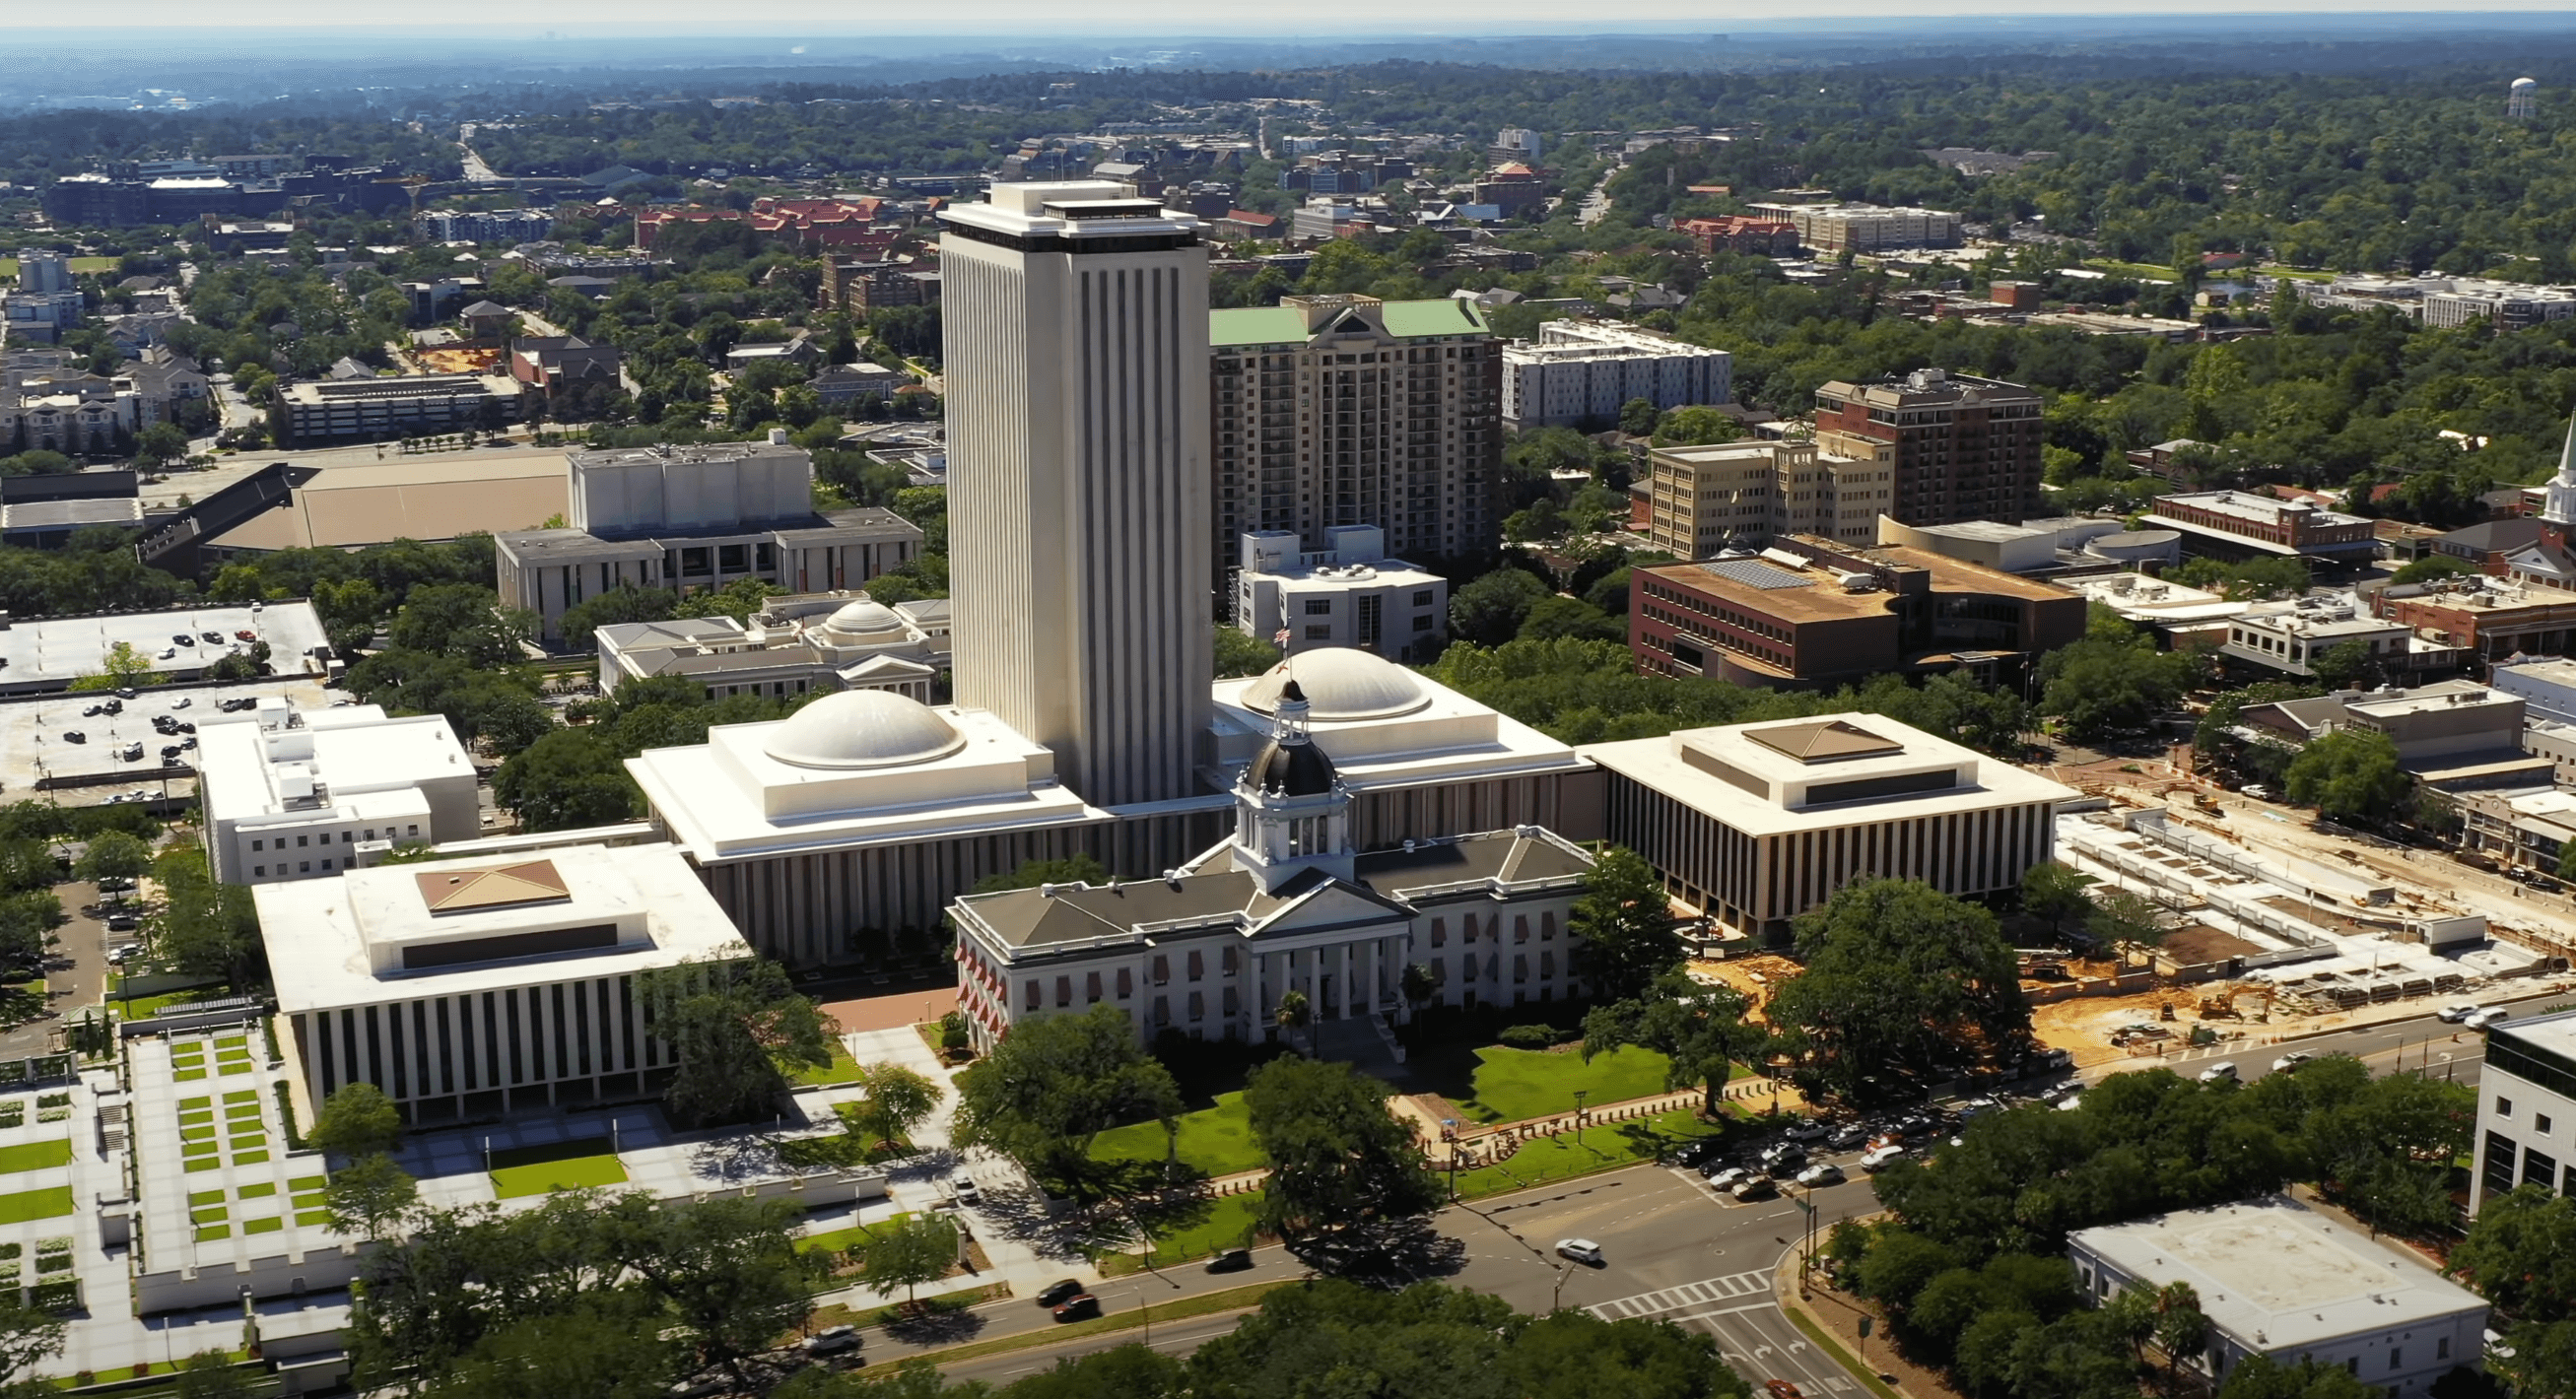 Tallahassee aerial view